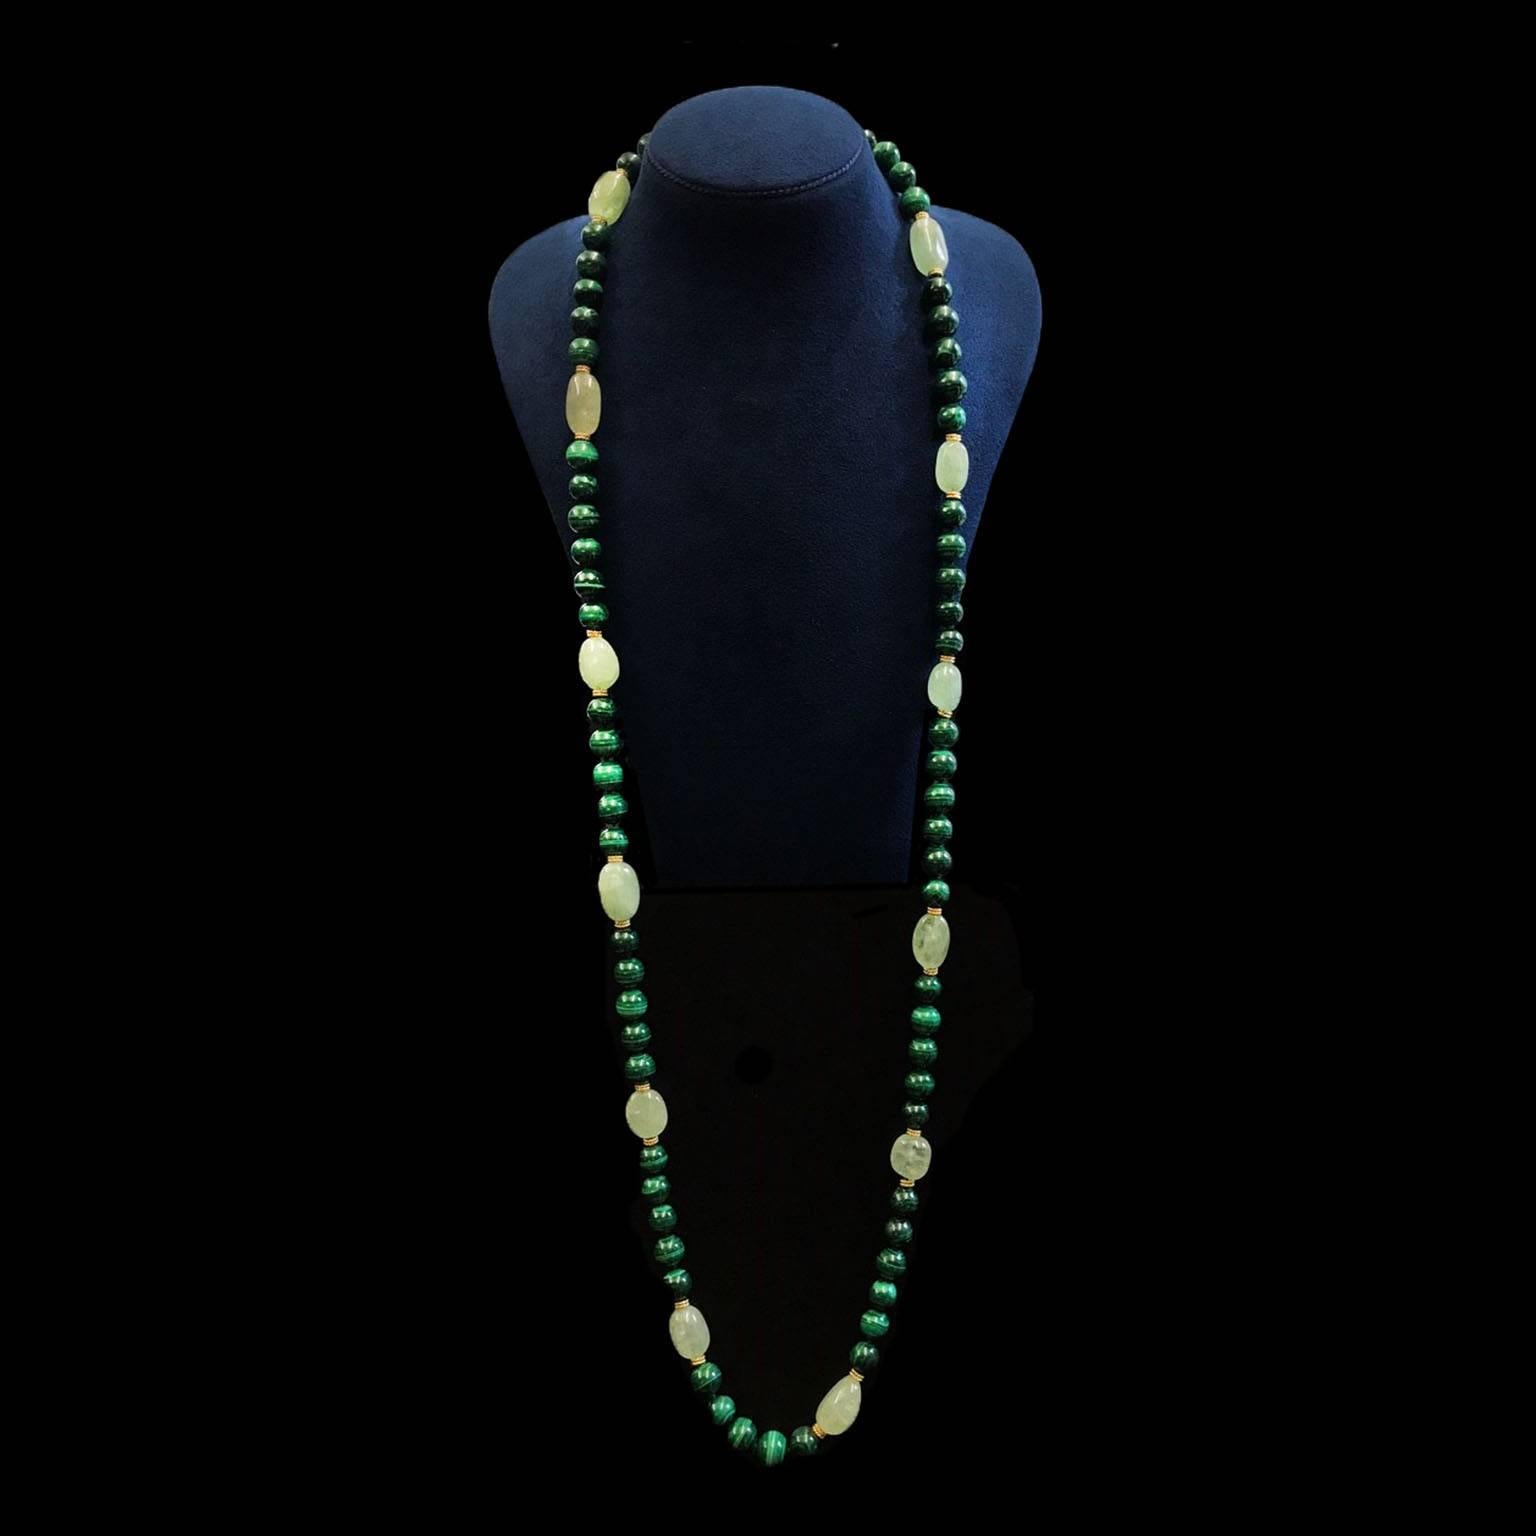 Emerald chunks and malachite necklace with 18kt yellow gold double wire roundels in between and is finished with gold ball clasp.